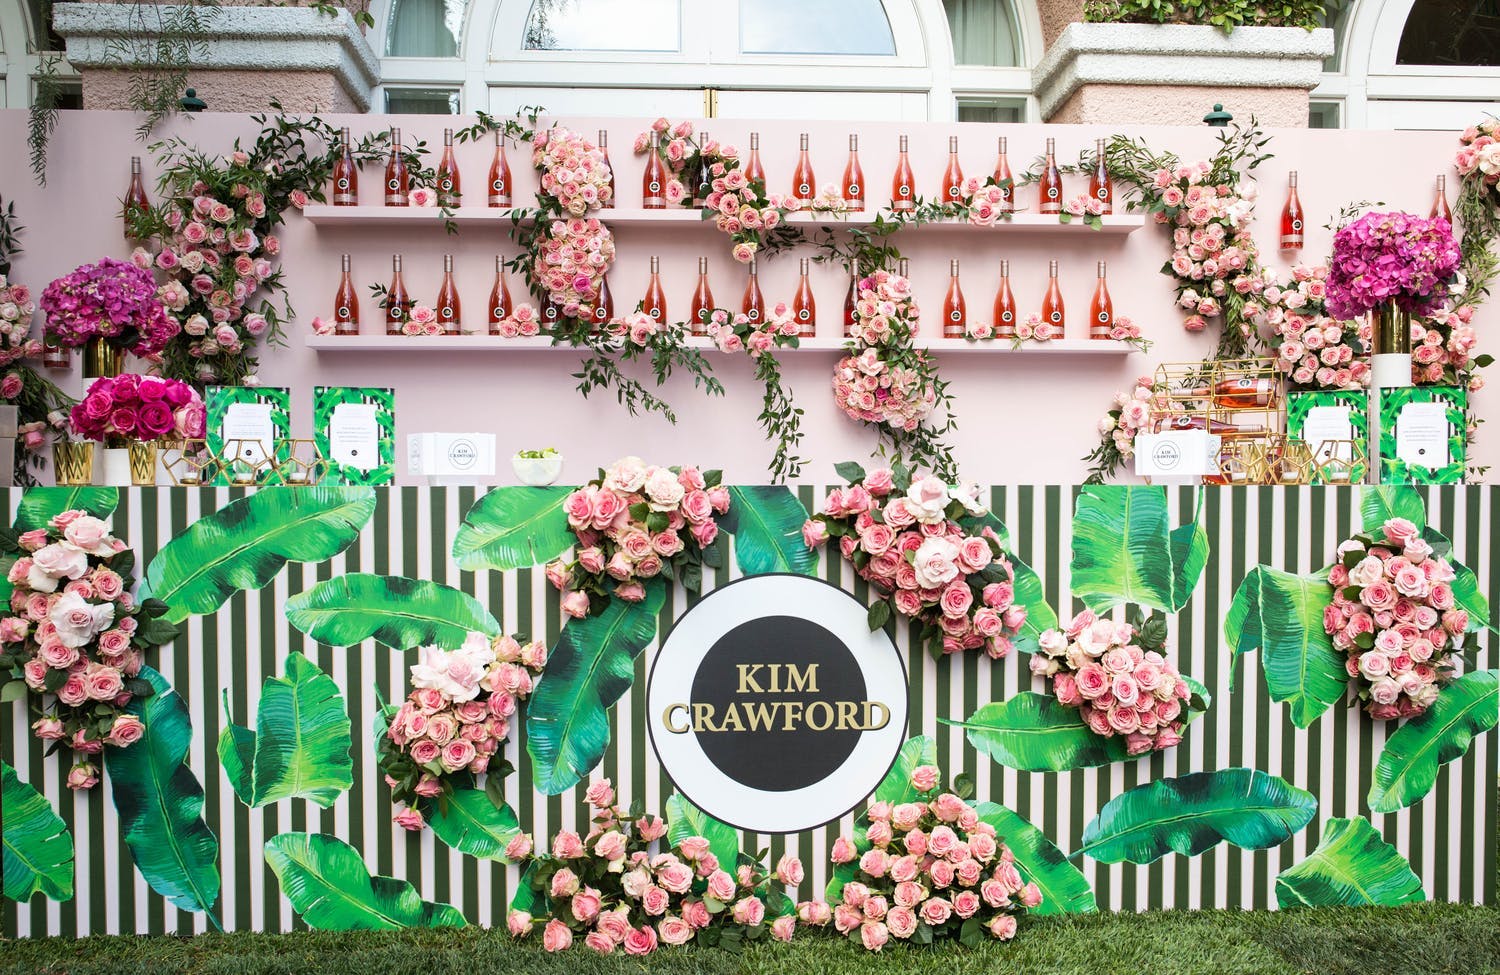 KIM CRAWFORD ROSÉ LAUNCH PARTY AT THE BEVERLY HILLS HOTEL IN LOS ANGELES, CA| PartySlate